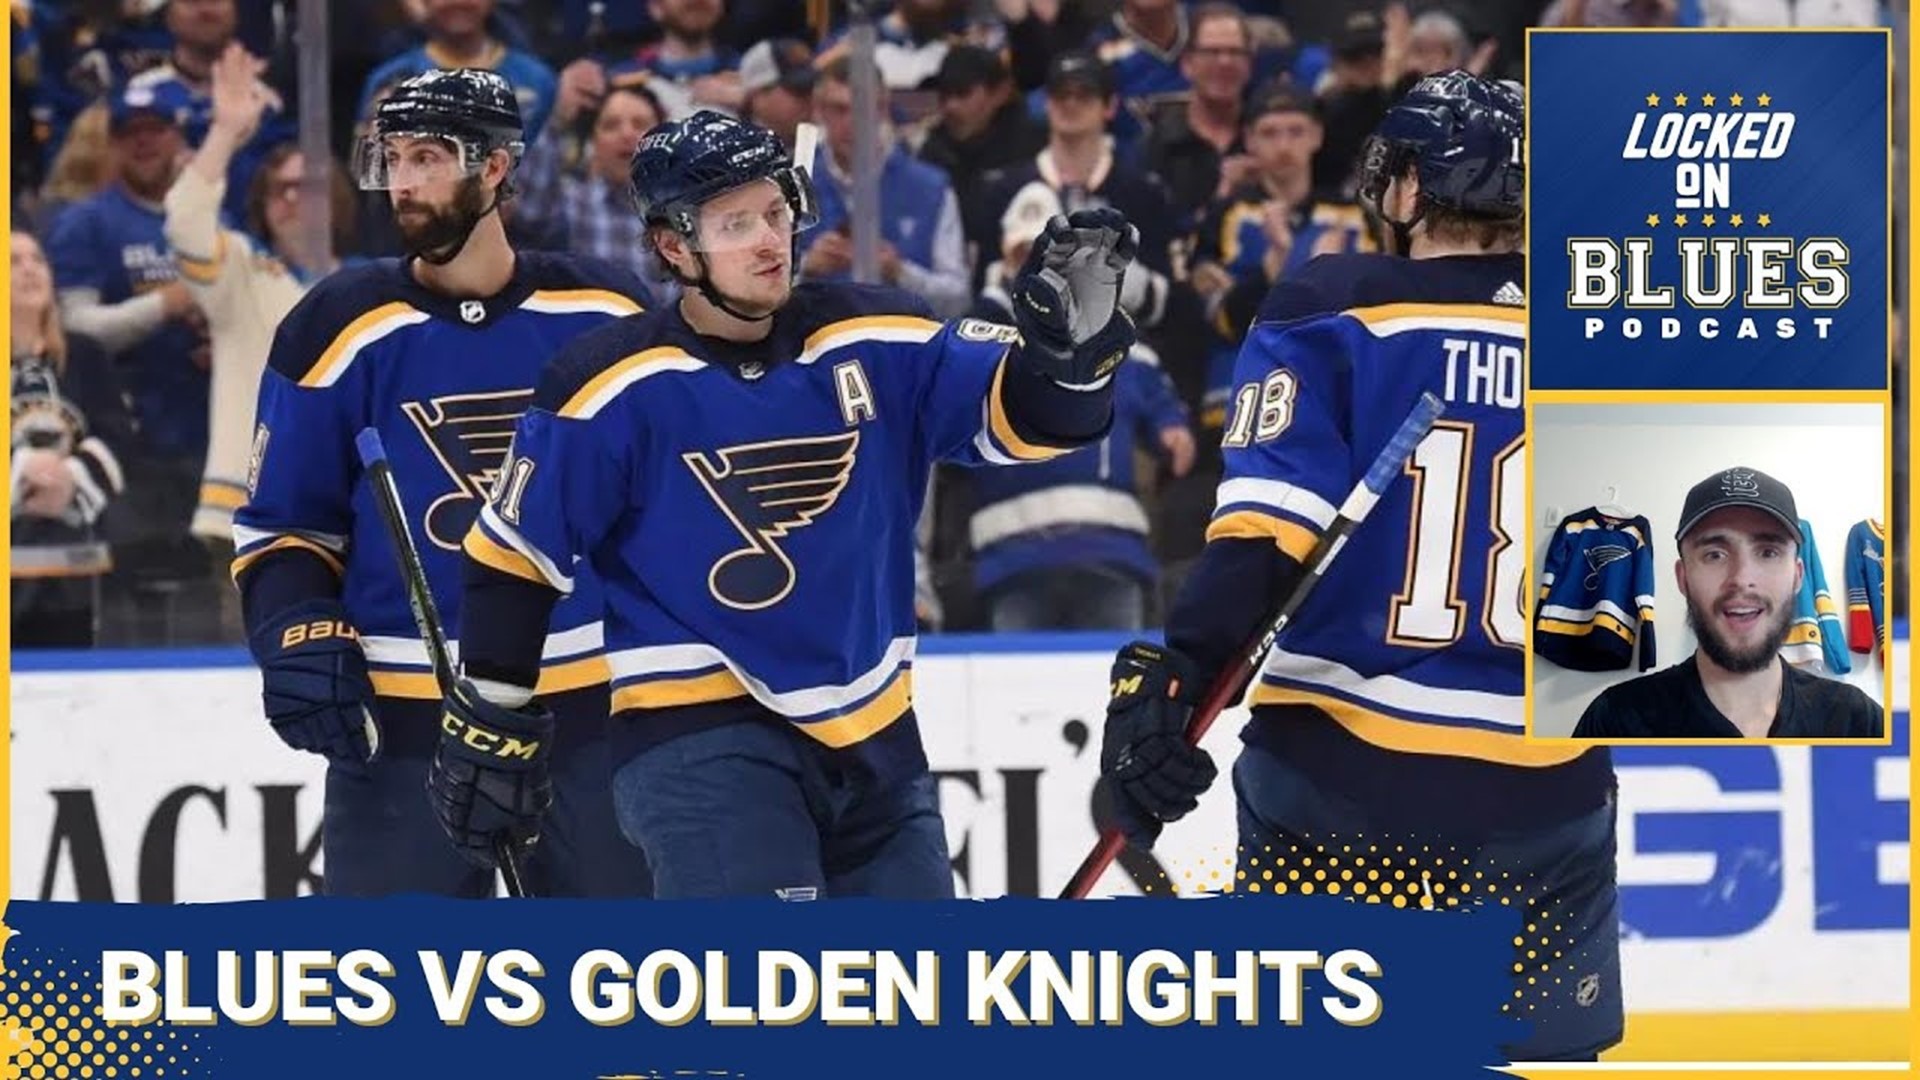 Josh Hyman discusses the play of Ryan O'Reilly, Jordan Binnington, and more as the Blues wrap up their long road trip. He gives out the award for Blue of the week.